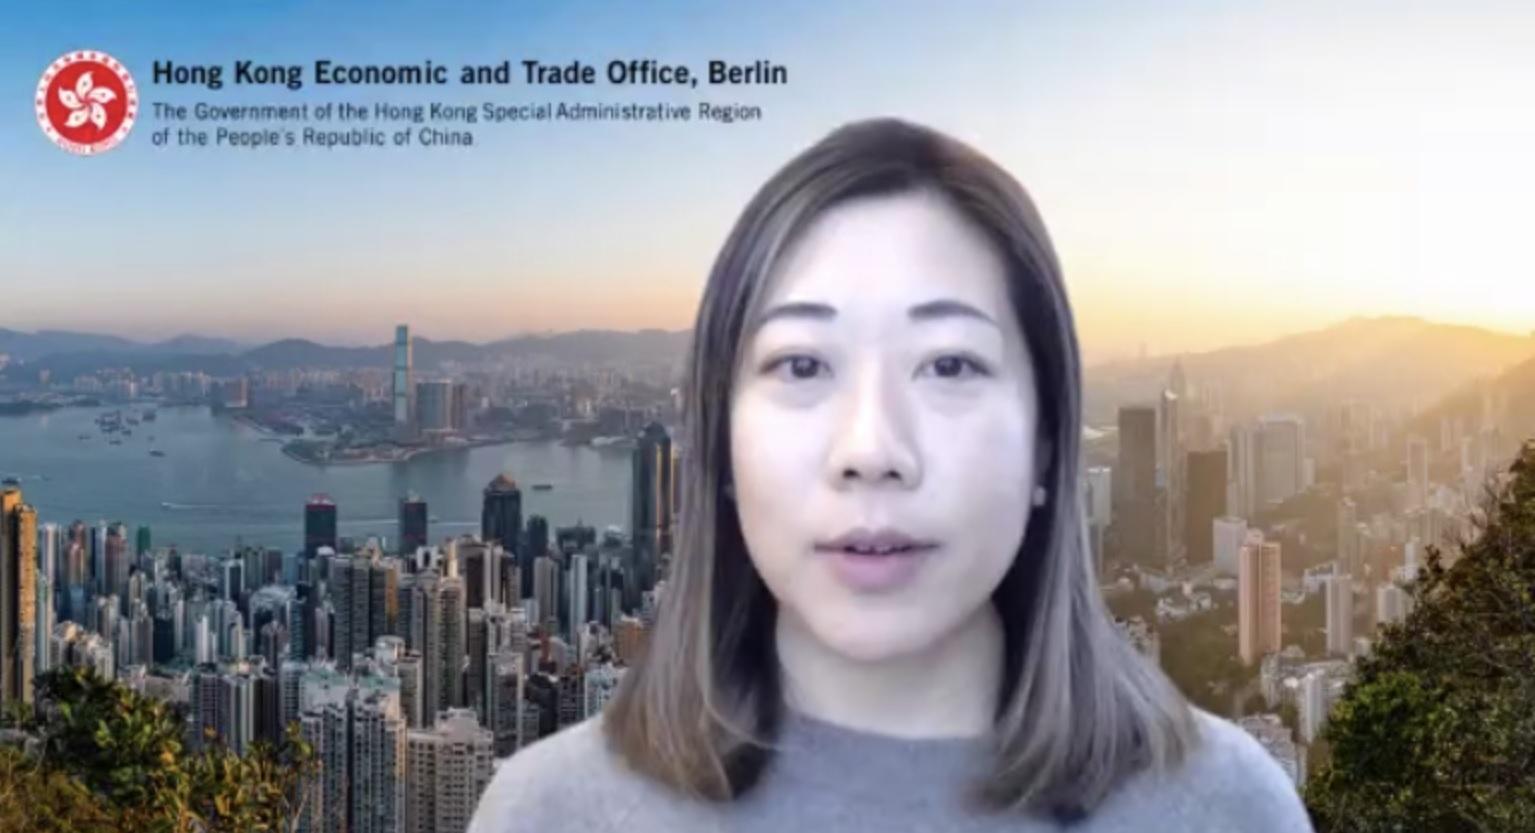 The Director of the Hong Kong Economic and Trade Office, Berlin, Ms Jenny Szeto, speaks about Hong Kong's vibrant arts scene at an online seminar on February 15 (Warsaw time).